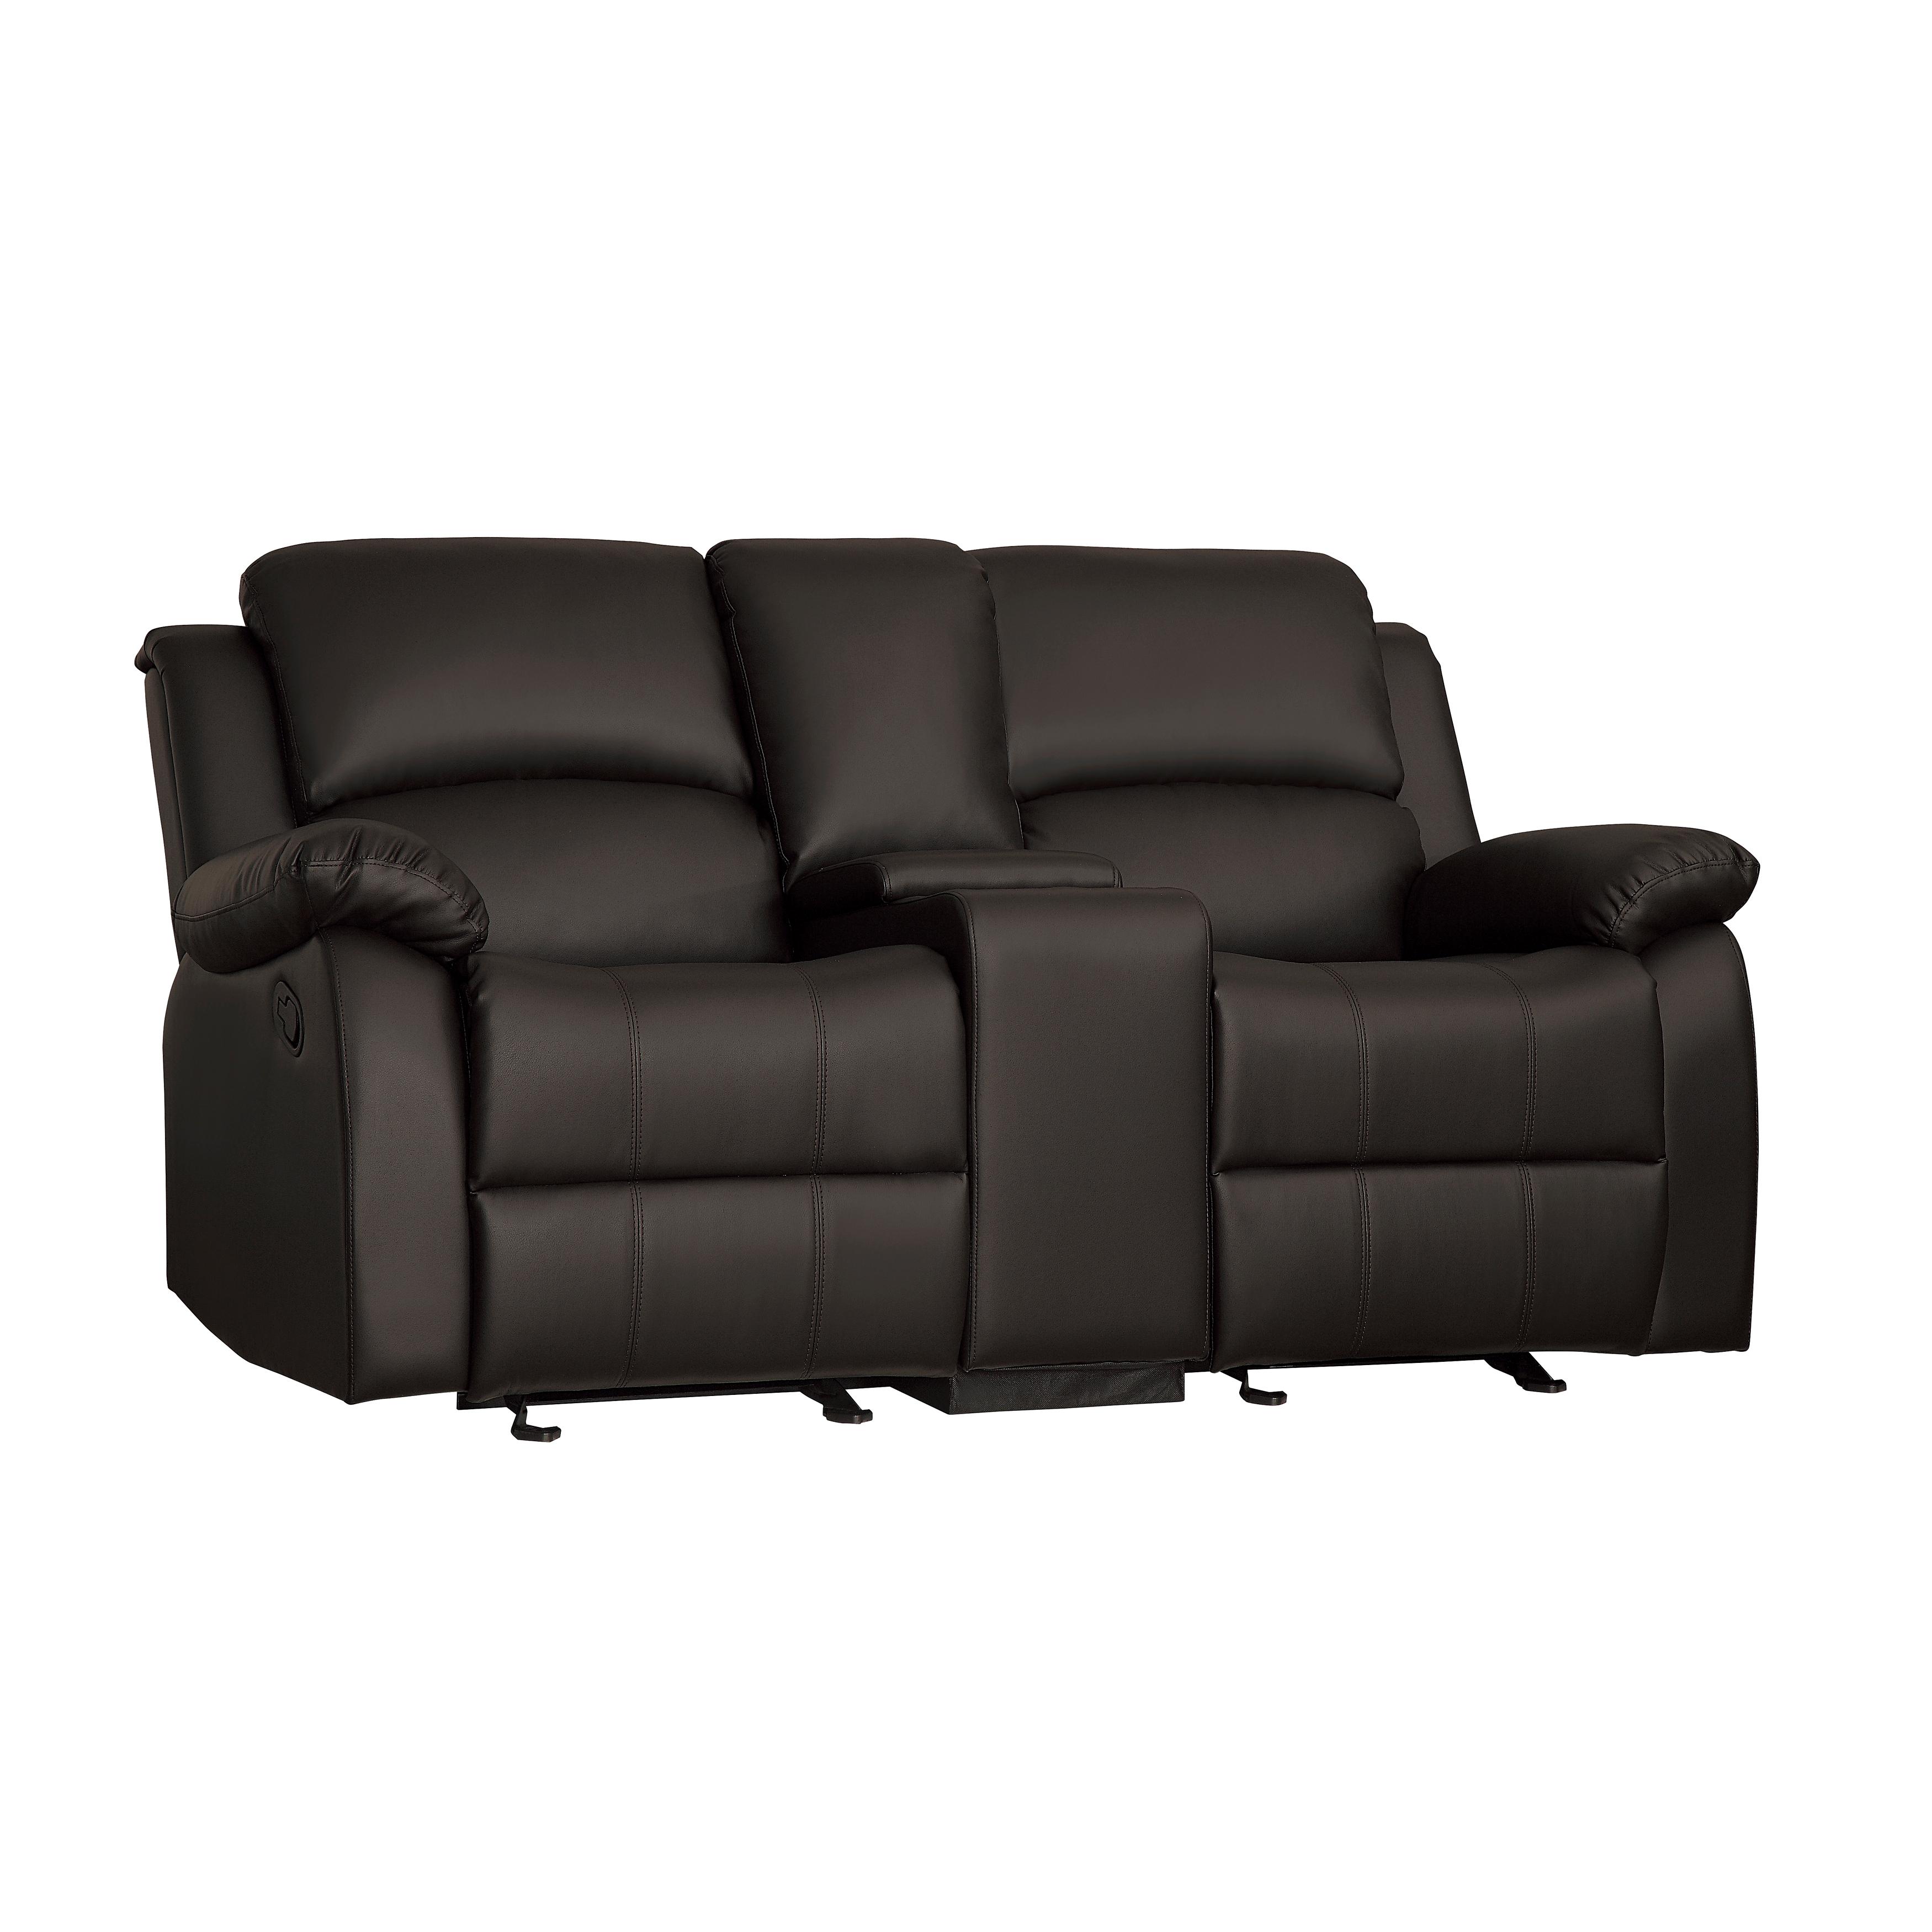 

    
Transitional Dark Brown Faux Leather Reclining Loveseat Homelegance 9928DBR-2 Clarkdale
